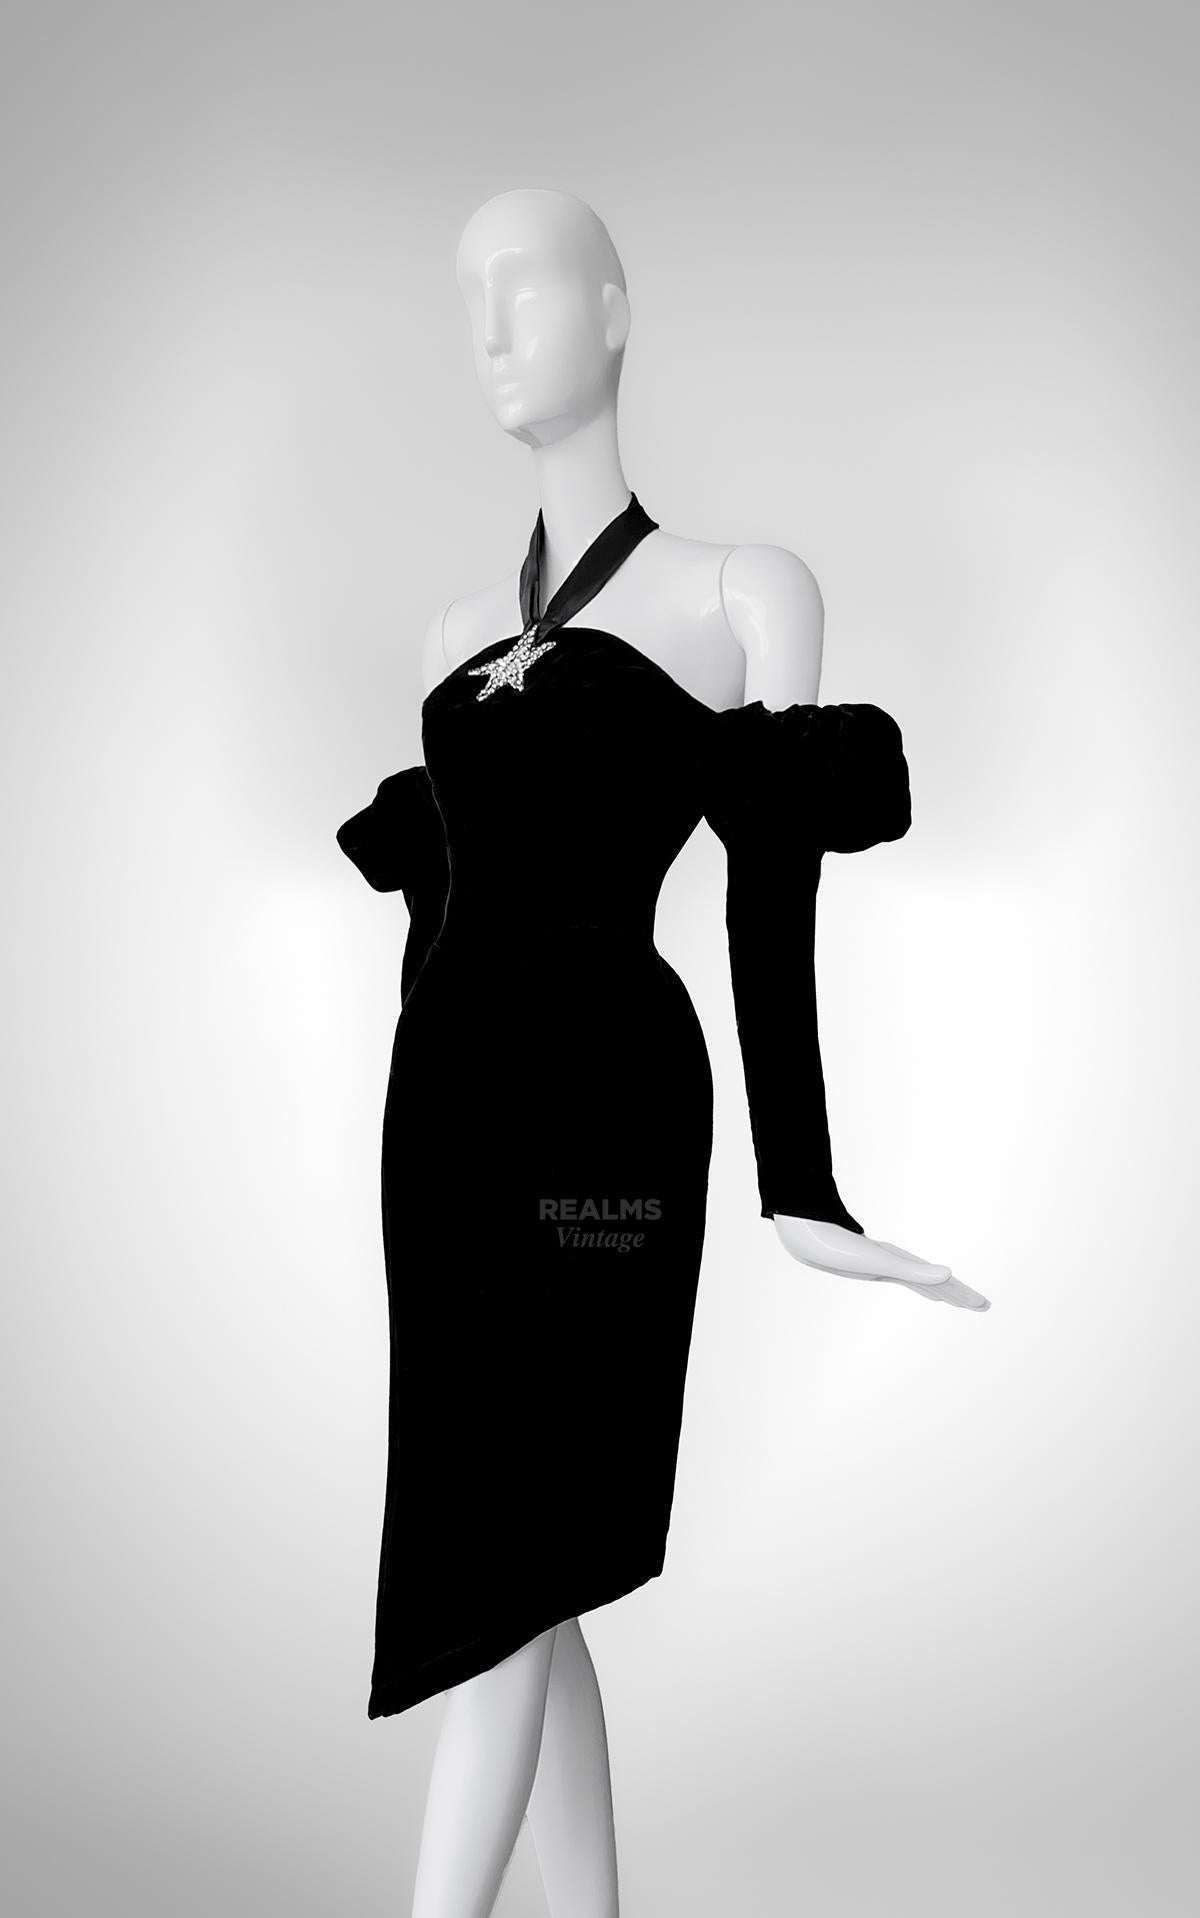 Museum worthy piece of Fashion History
A fabulous extremely rare Thierry Mugler evening gown. Very beautiful old Hollywood vibes. Assuming FW1986 Collection as the black velvet and crystal star details were significant for this Collection.
Dramatic